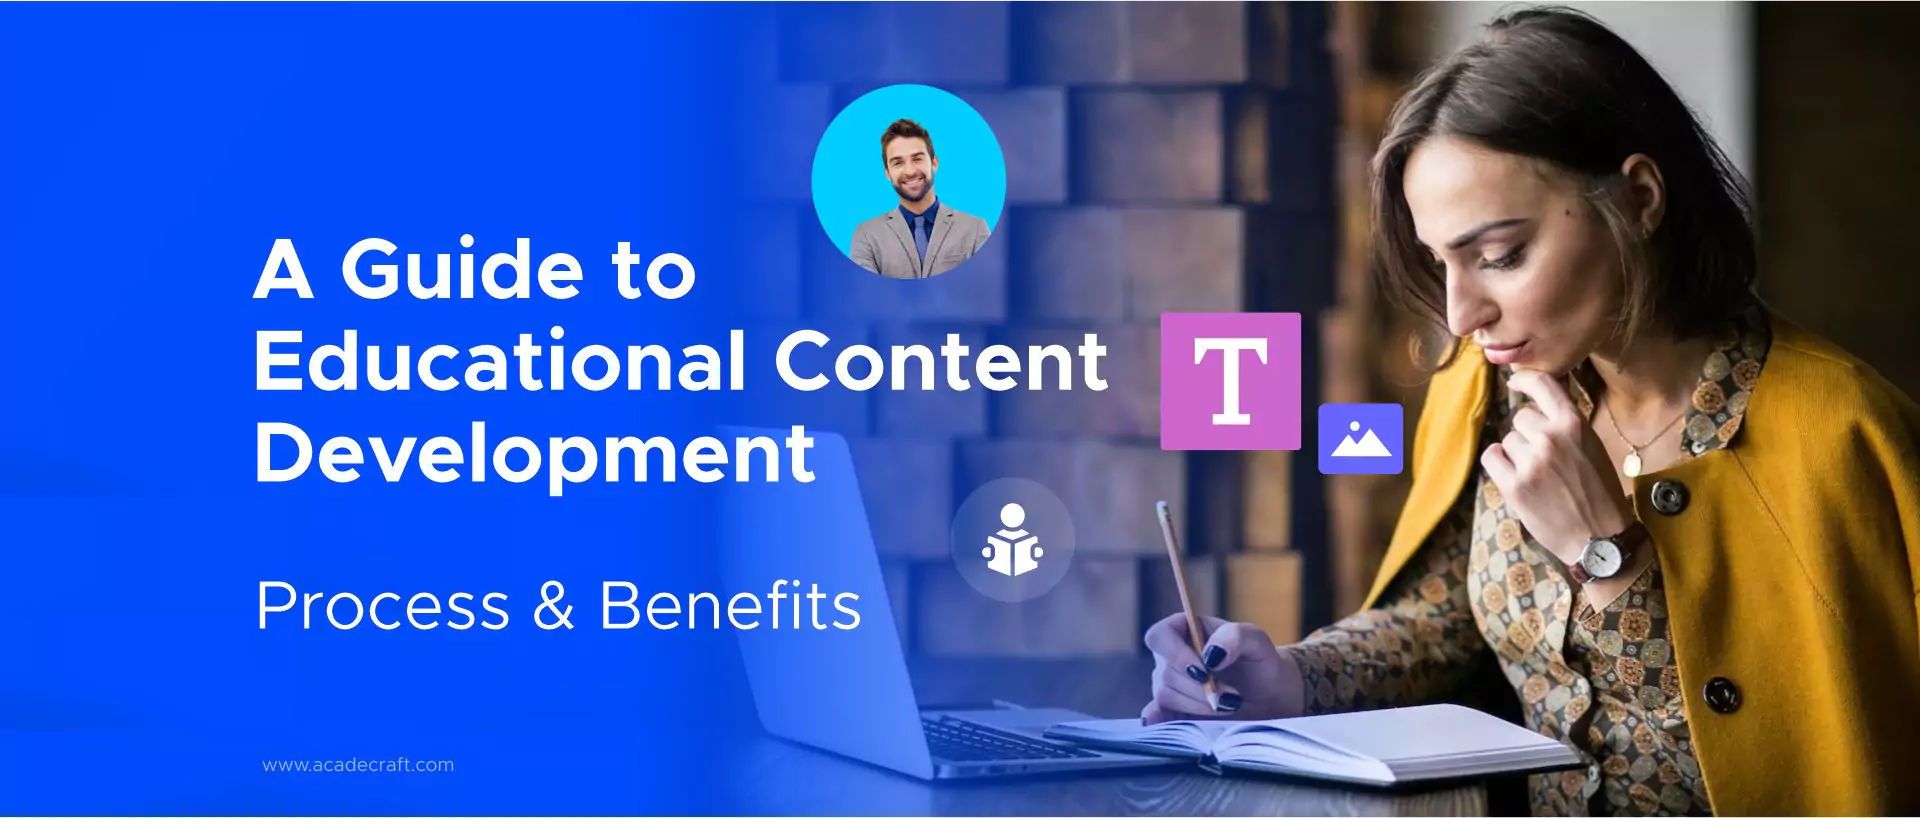 A Guide to Educational Content Development: Process & Benefits